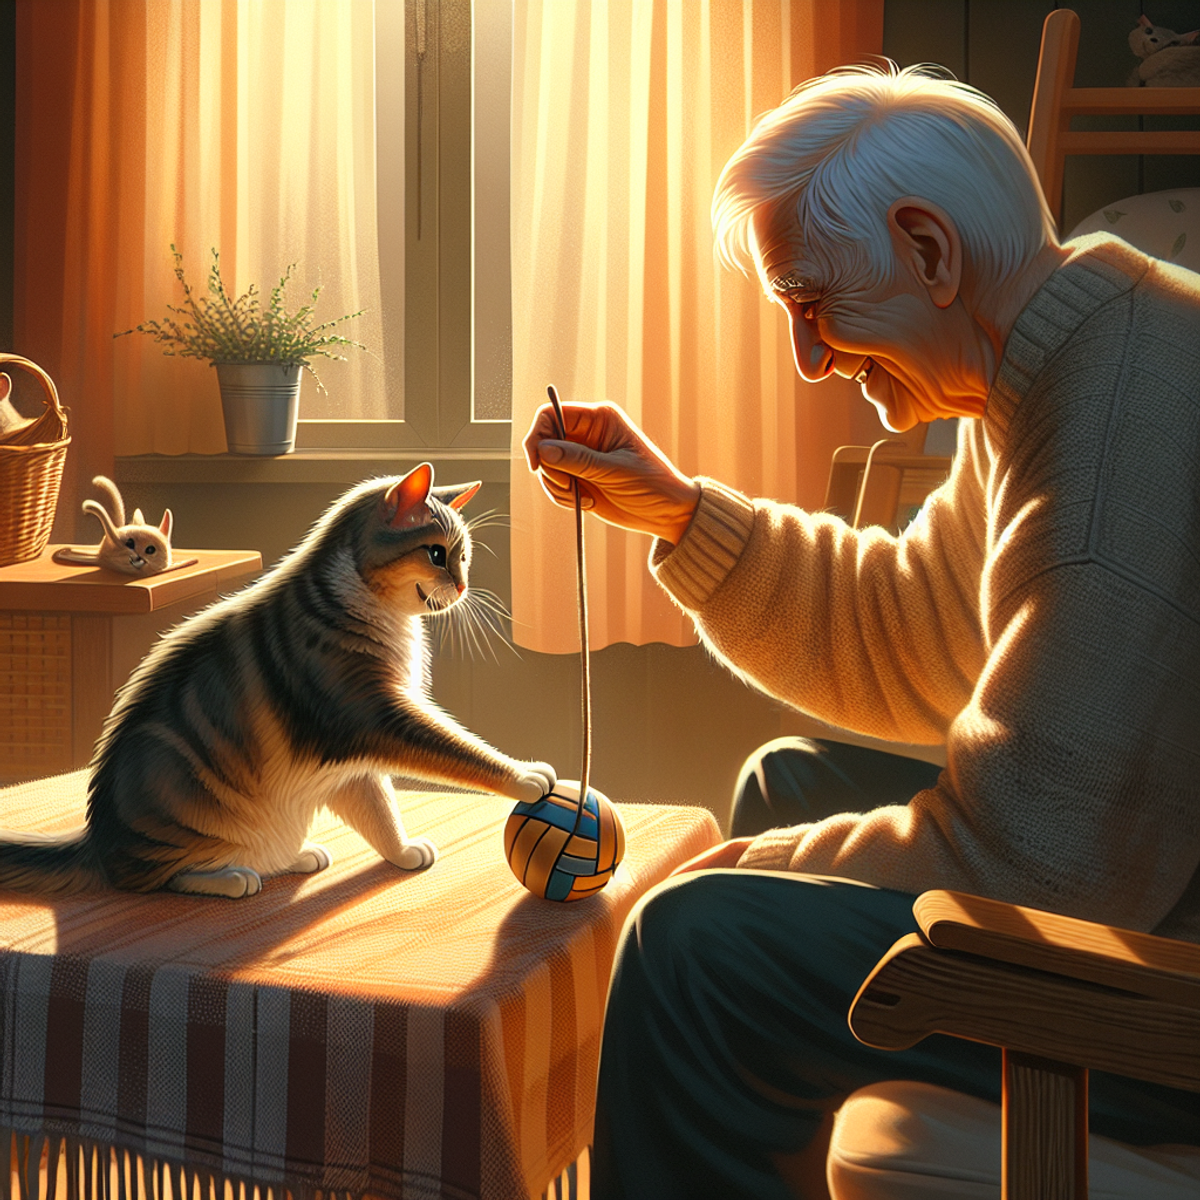 An elderly cat happily playing with a homemade toy, while the subtle presence of its unseen owner adds to the heartwarming atmosphere.